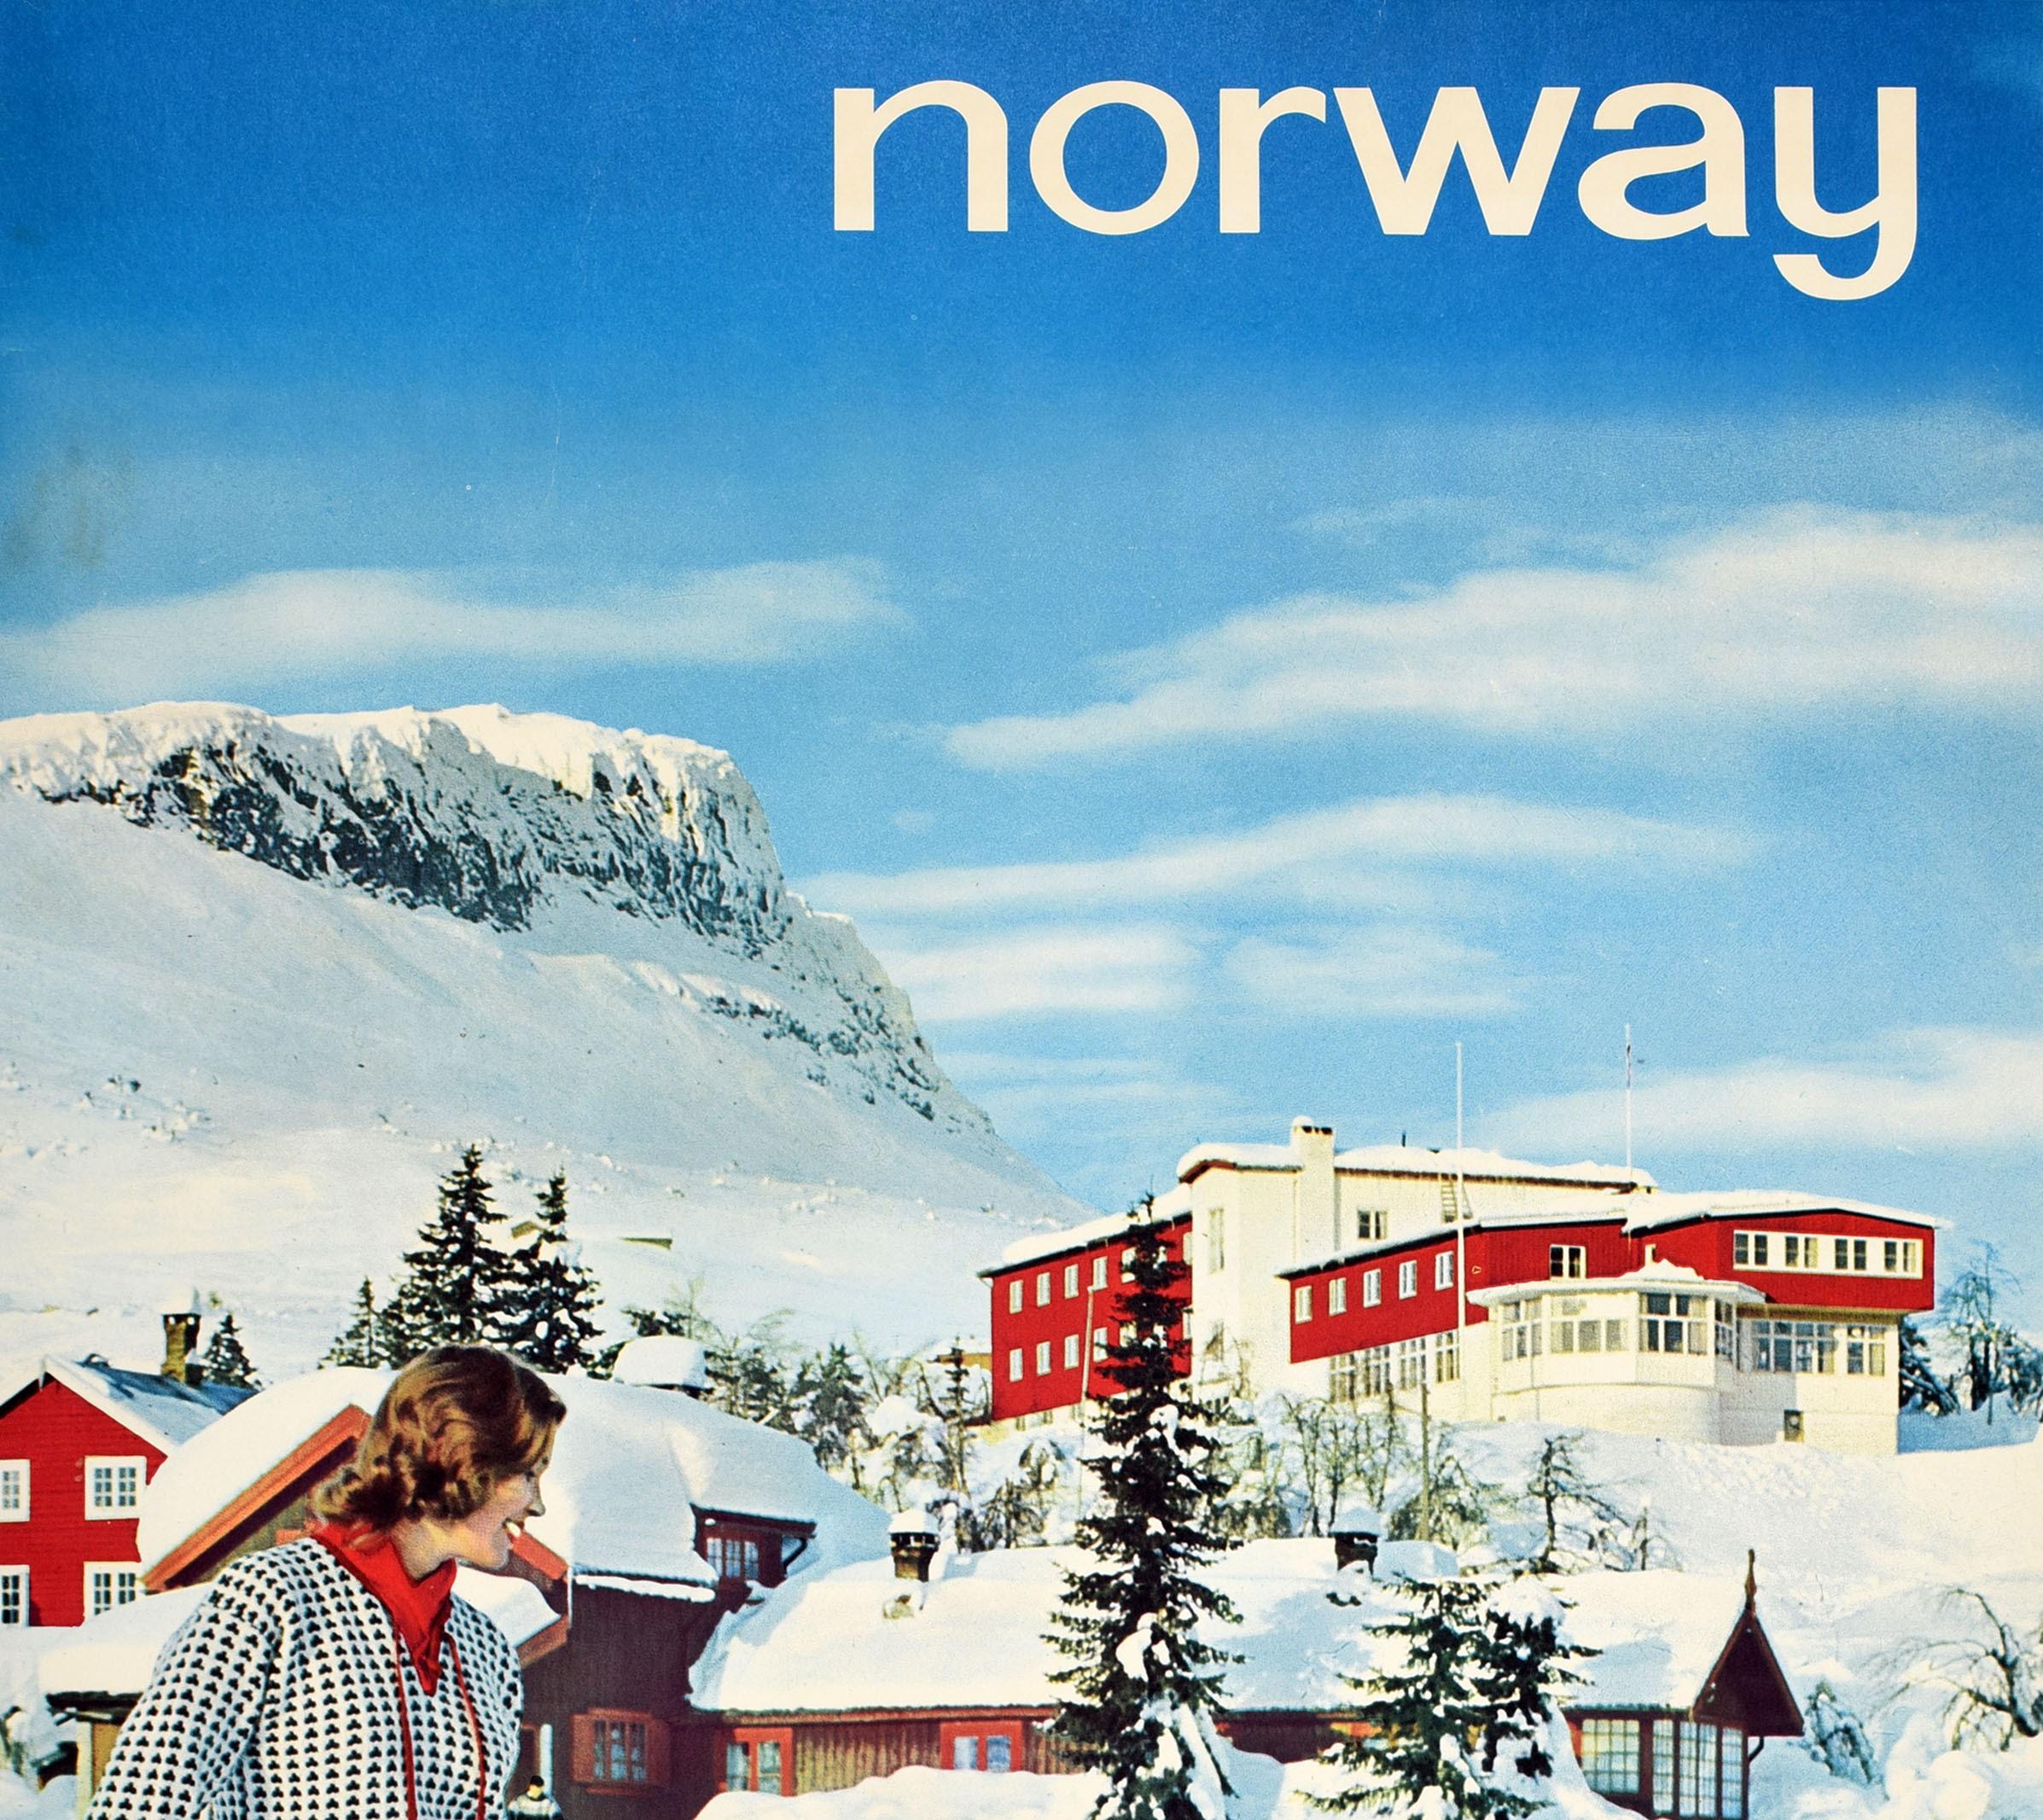 Original vintage ski and winter sport travel poster for Norway featuring a colour photo by Arne With Normann (1911-1990) of two smiling skiers in patterned jumpers putting on their skis in front of snow topped chalet buildings, trees and mountain in